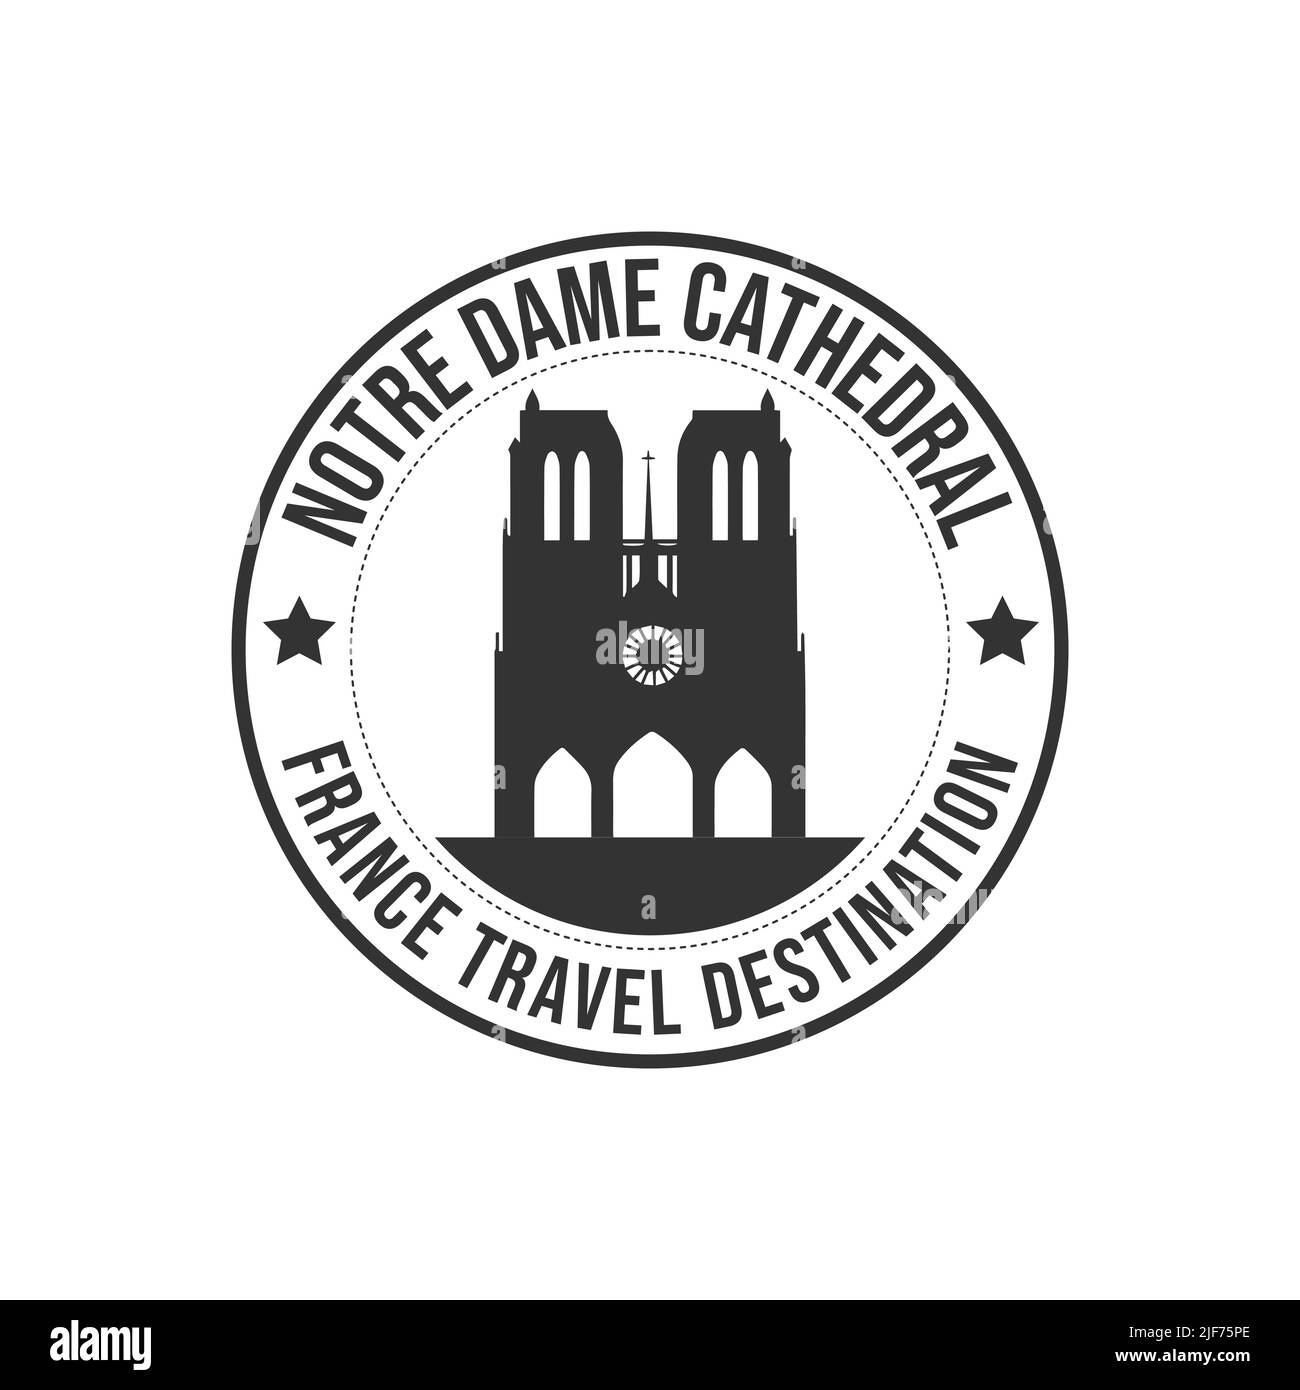 Badge rubber stamp with the text Notre dame cathedral travel destination written inside the stamp. Time to travel. France historical architecture trav Stock Vector